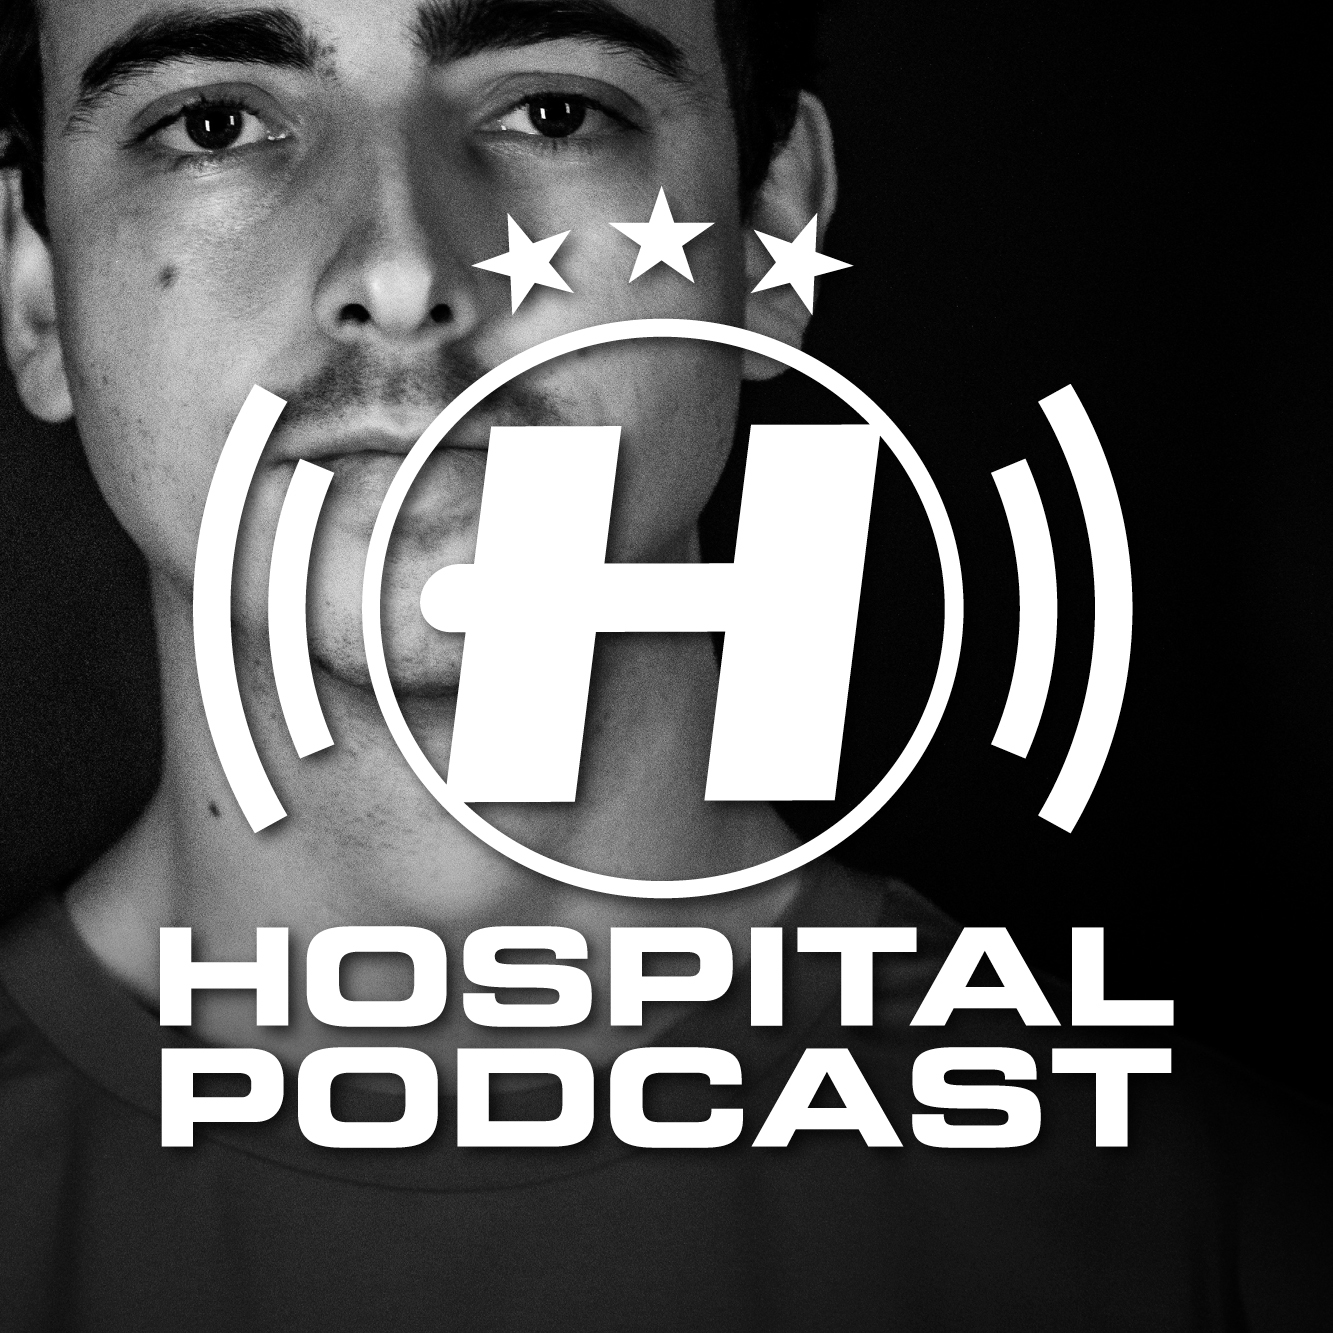 Hospital Podcast 452 with Whiney Artwork